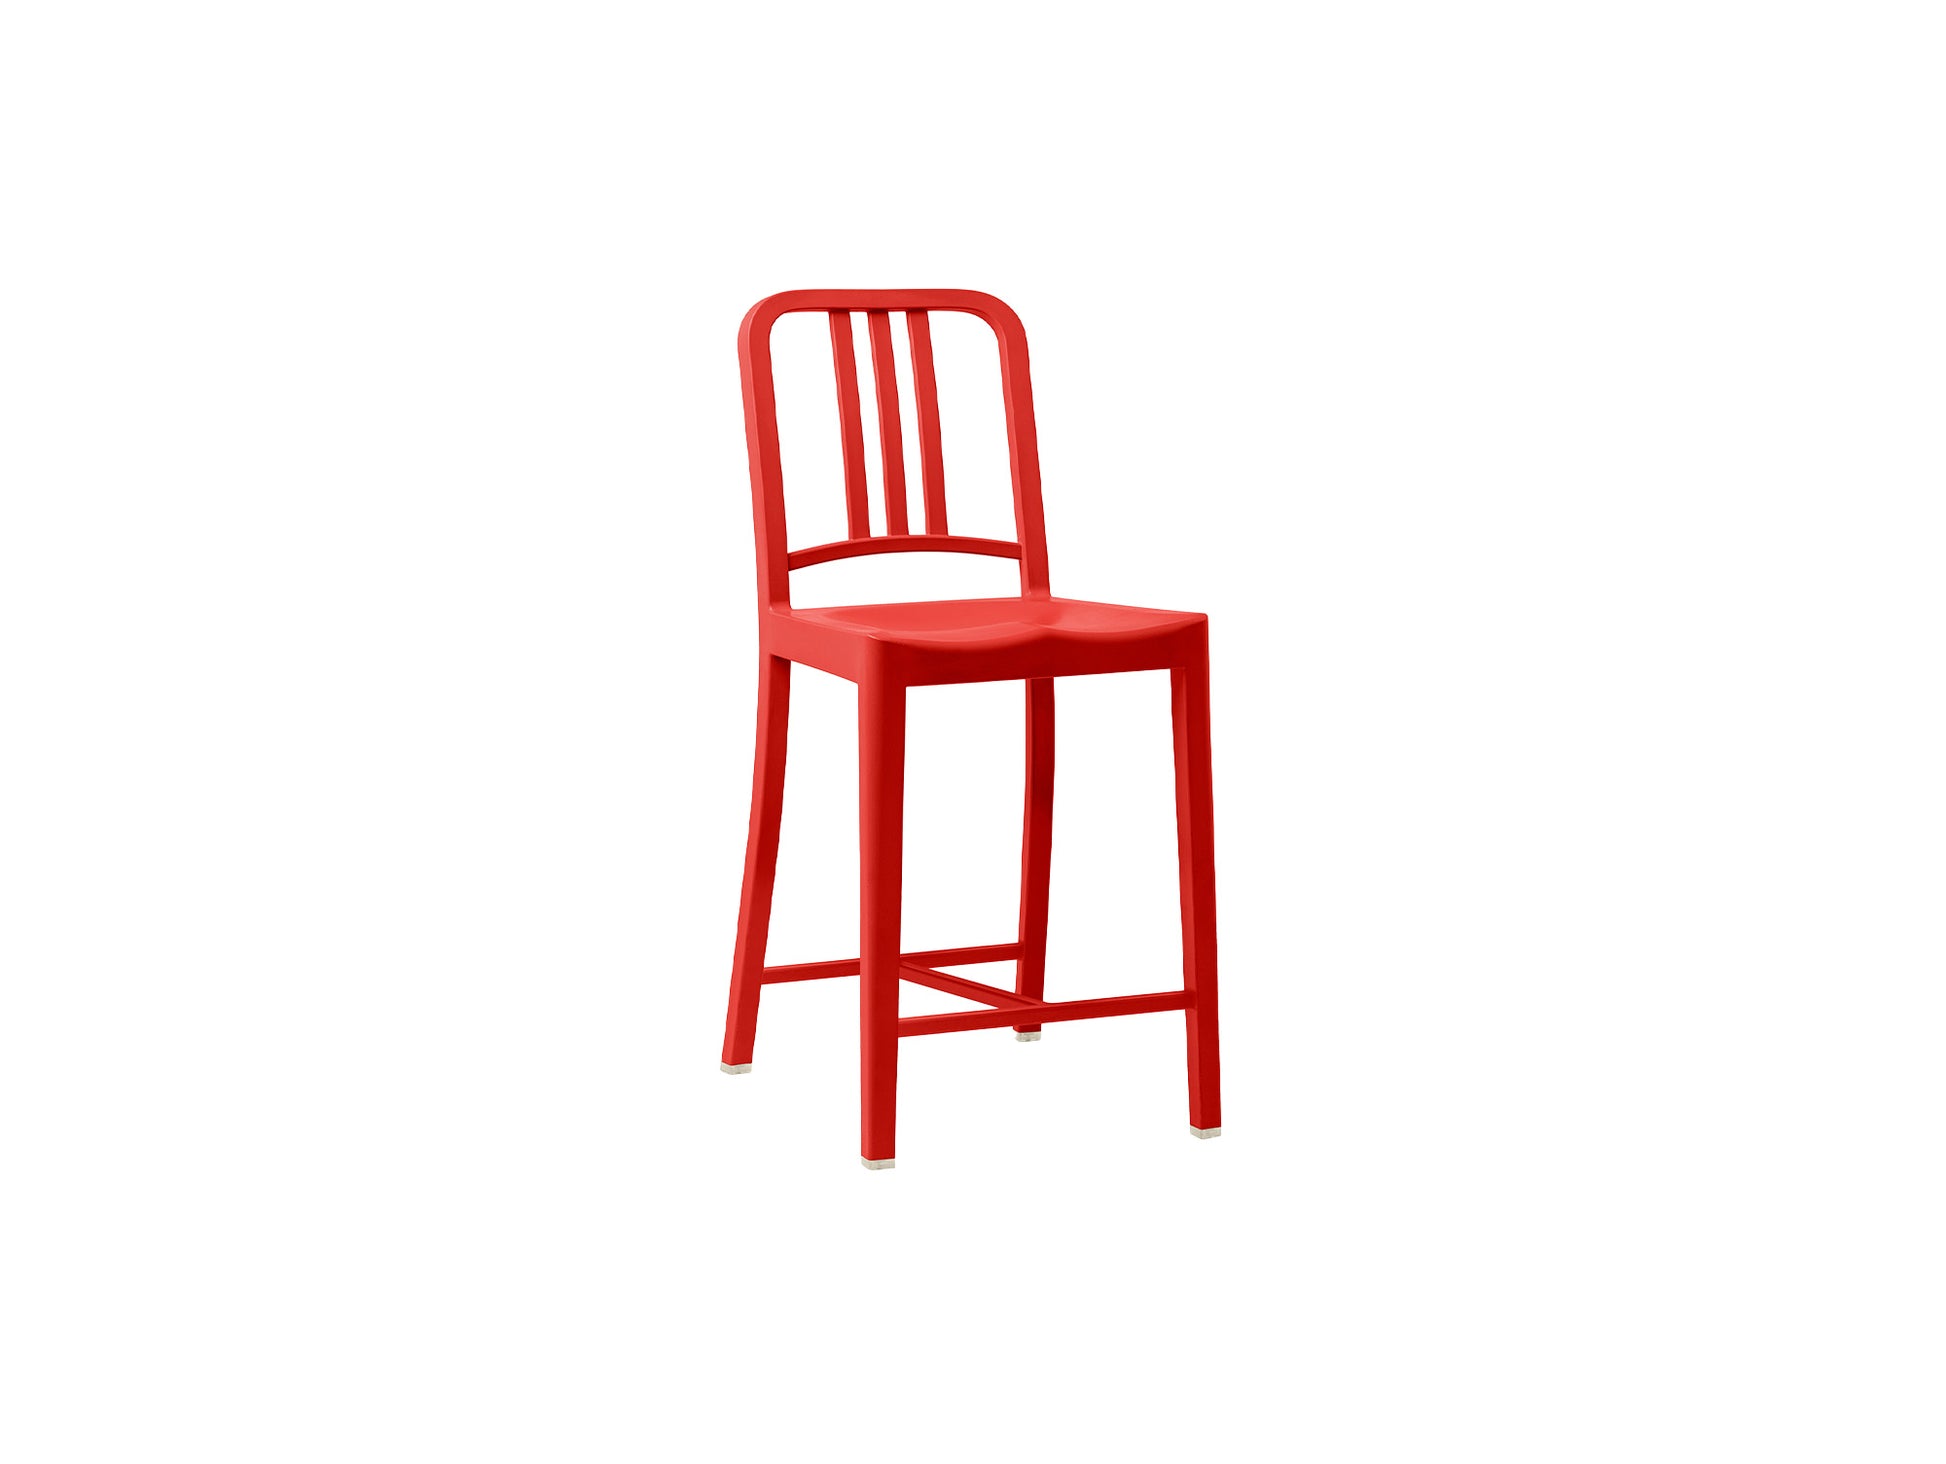 111 Navy Counter Stool by Emeco -  Red